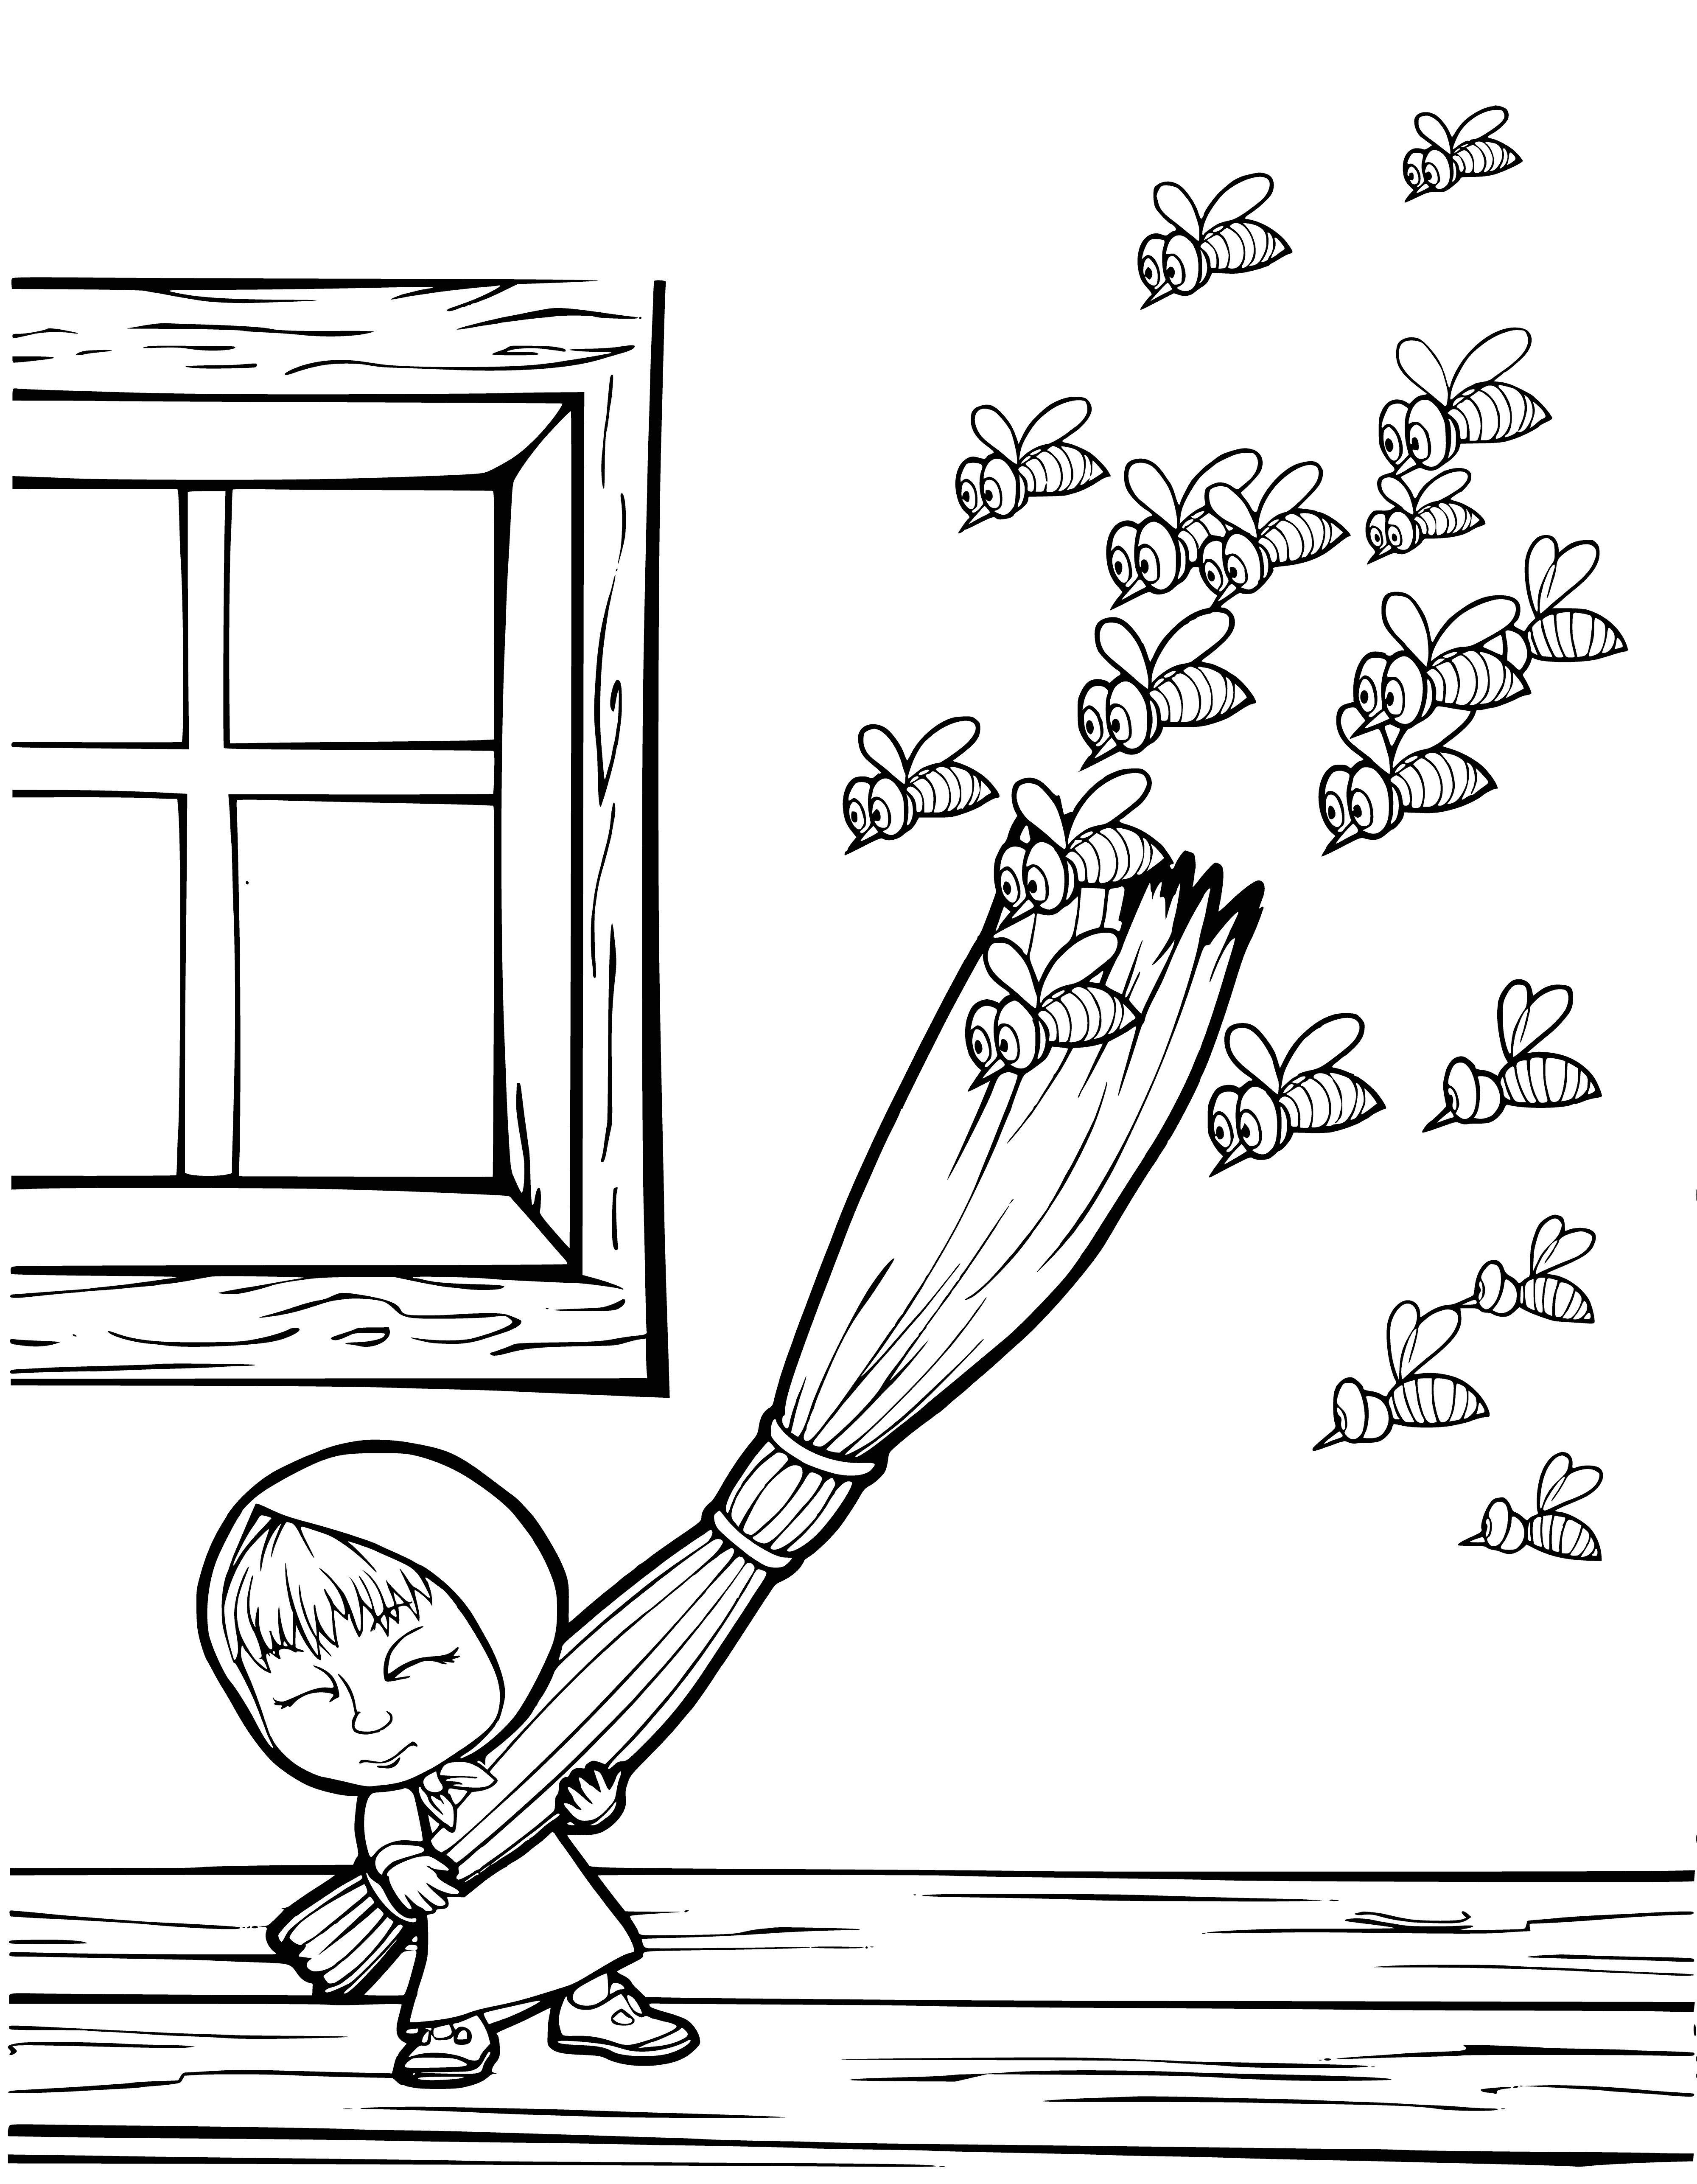 coloring page: Girl Masha befriends bees in happy coloring page scene.